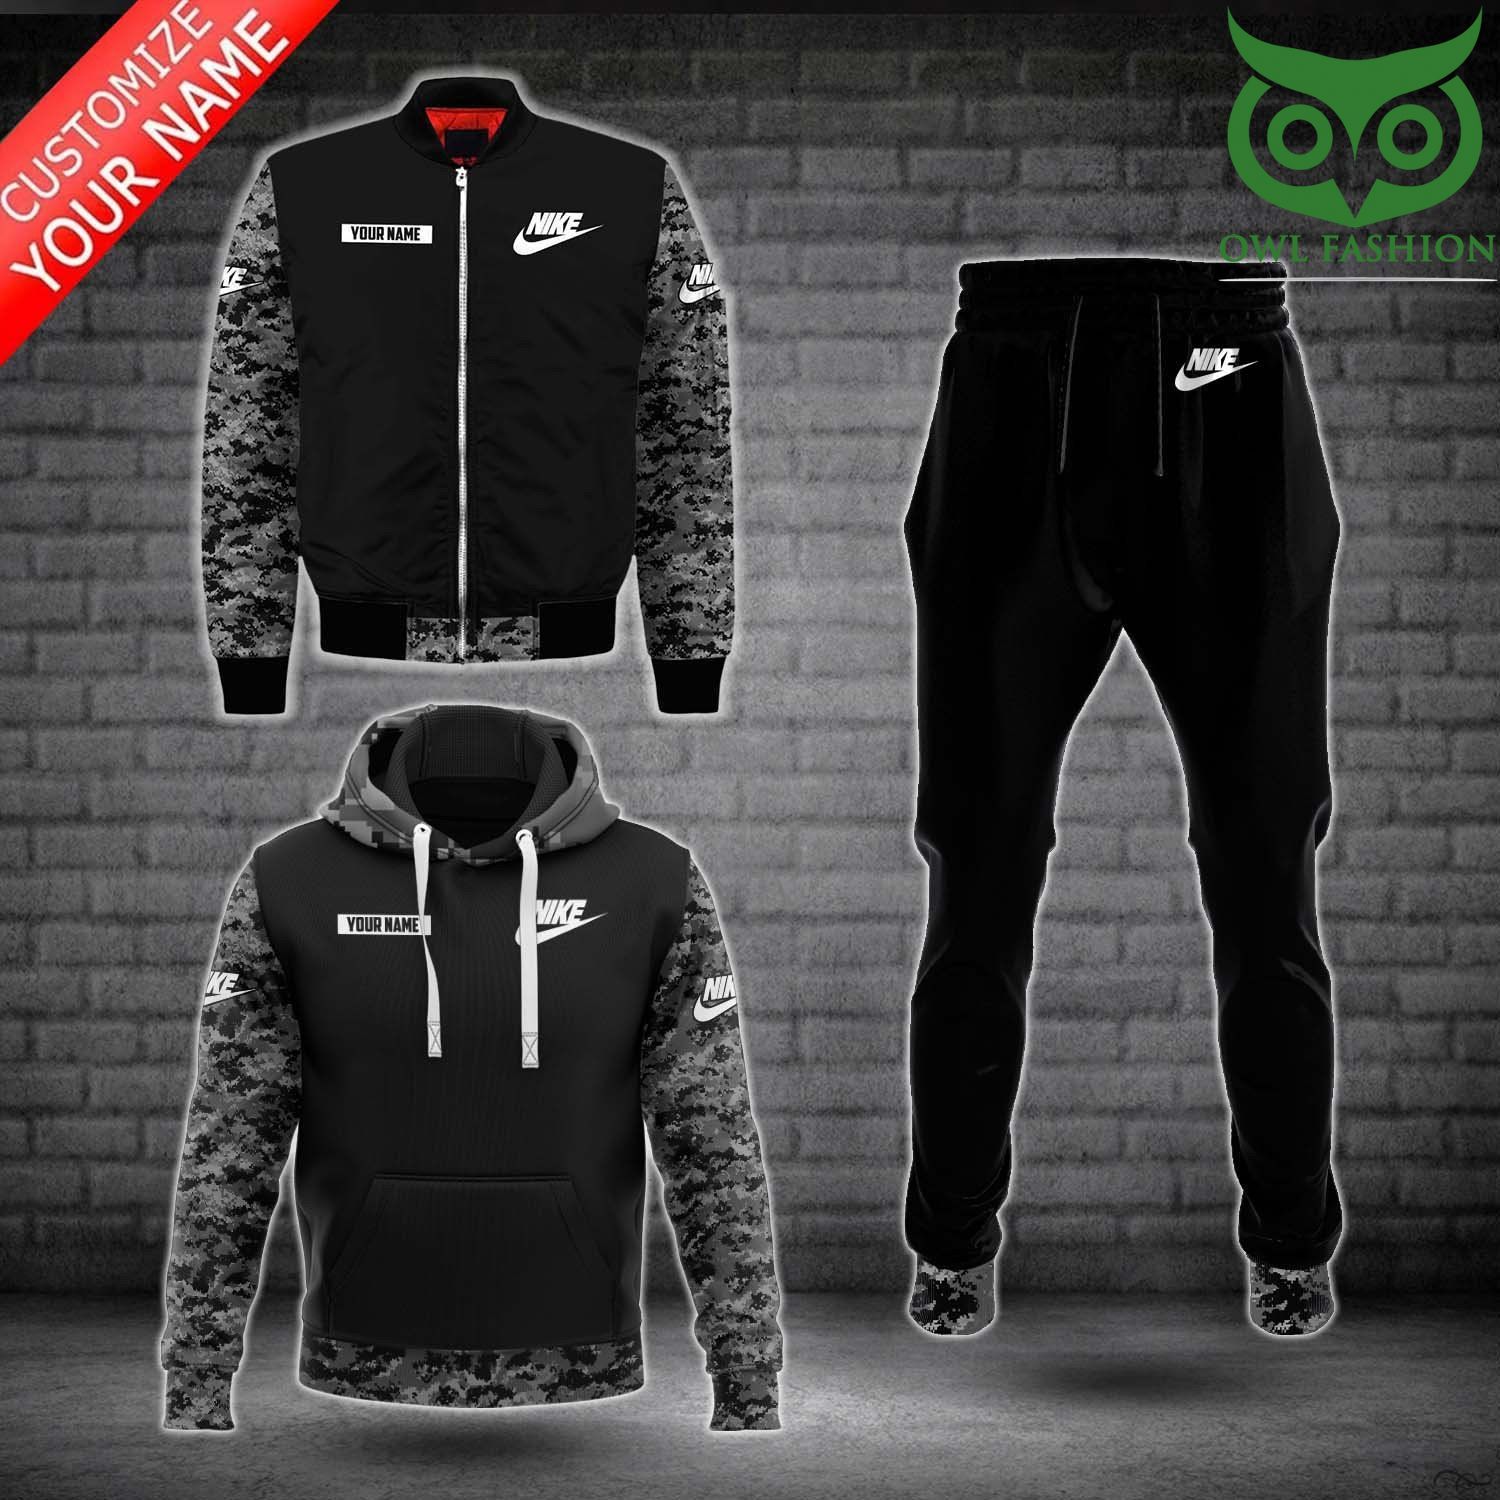 Personalized Nike grey and black camo bomber jacket hoodies and sweatpants